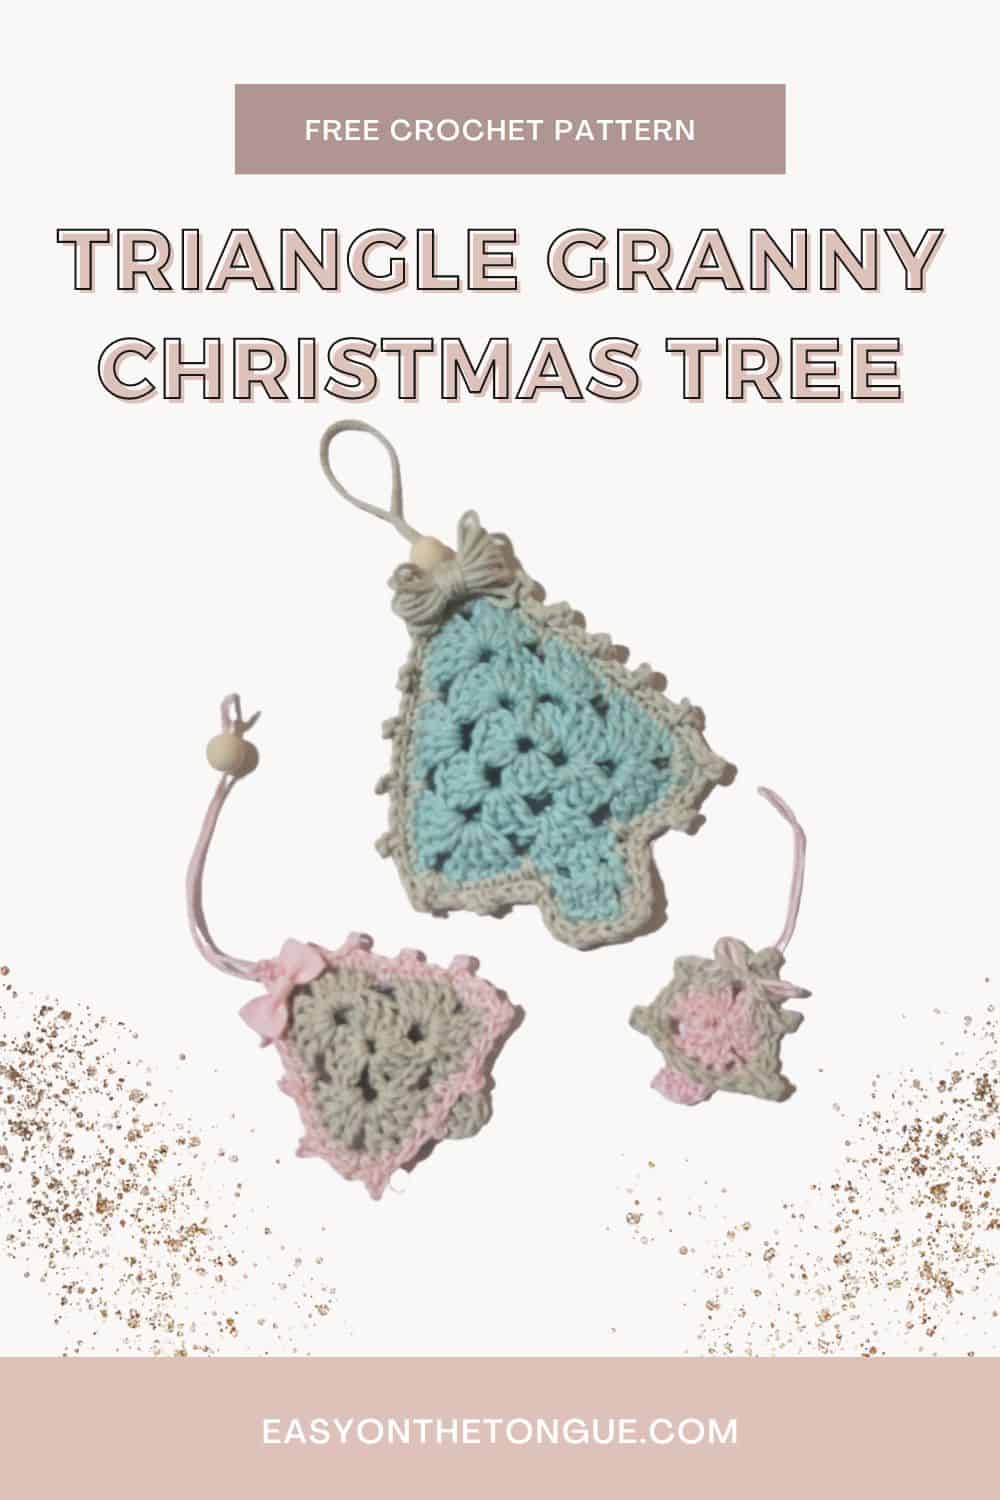 Triangle granny Christmas tree ornament by easyonthetongue.com Pin2 Quick crochet pattern for a triangle granny Christmas tree ornament